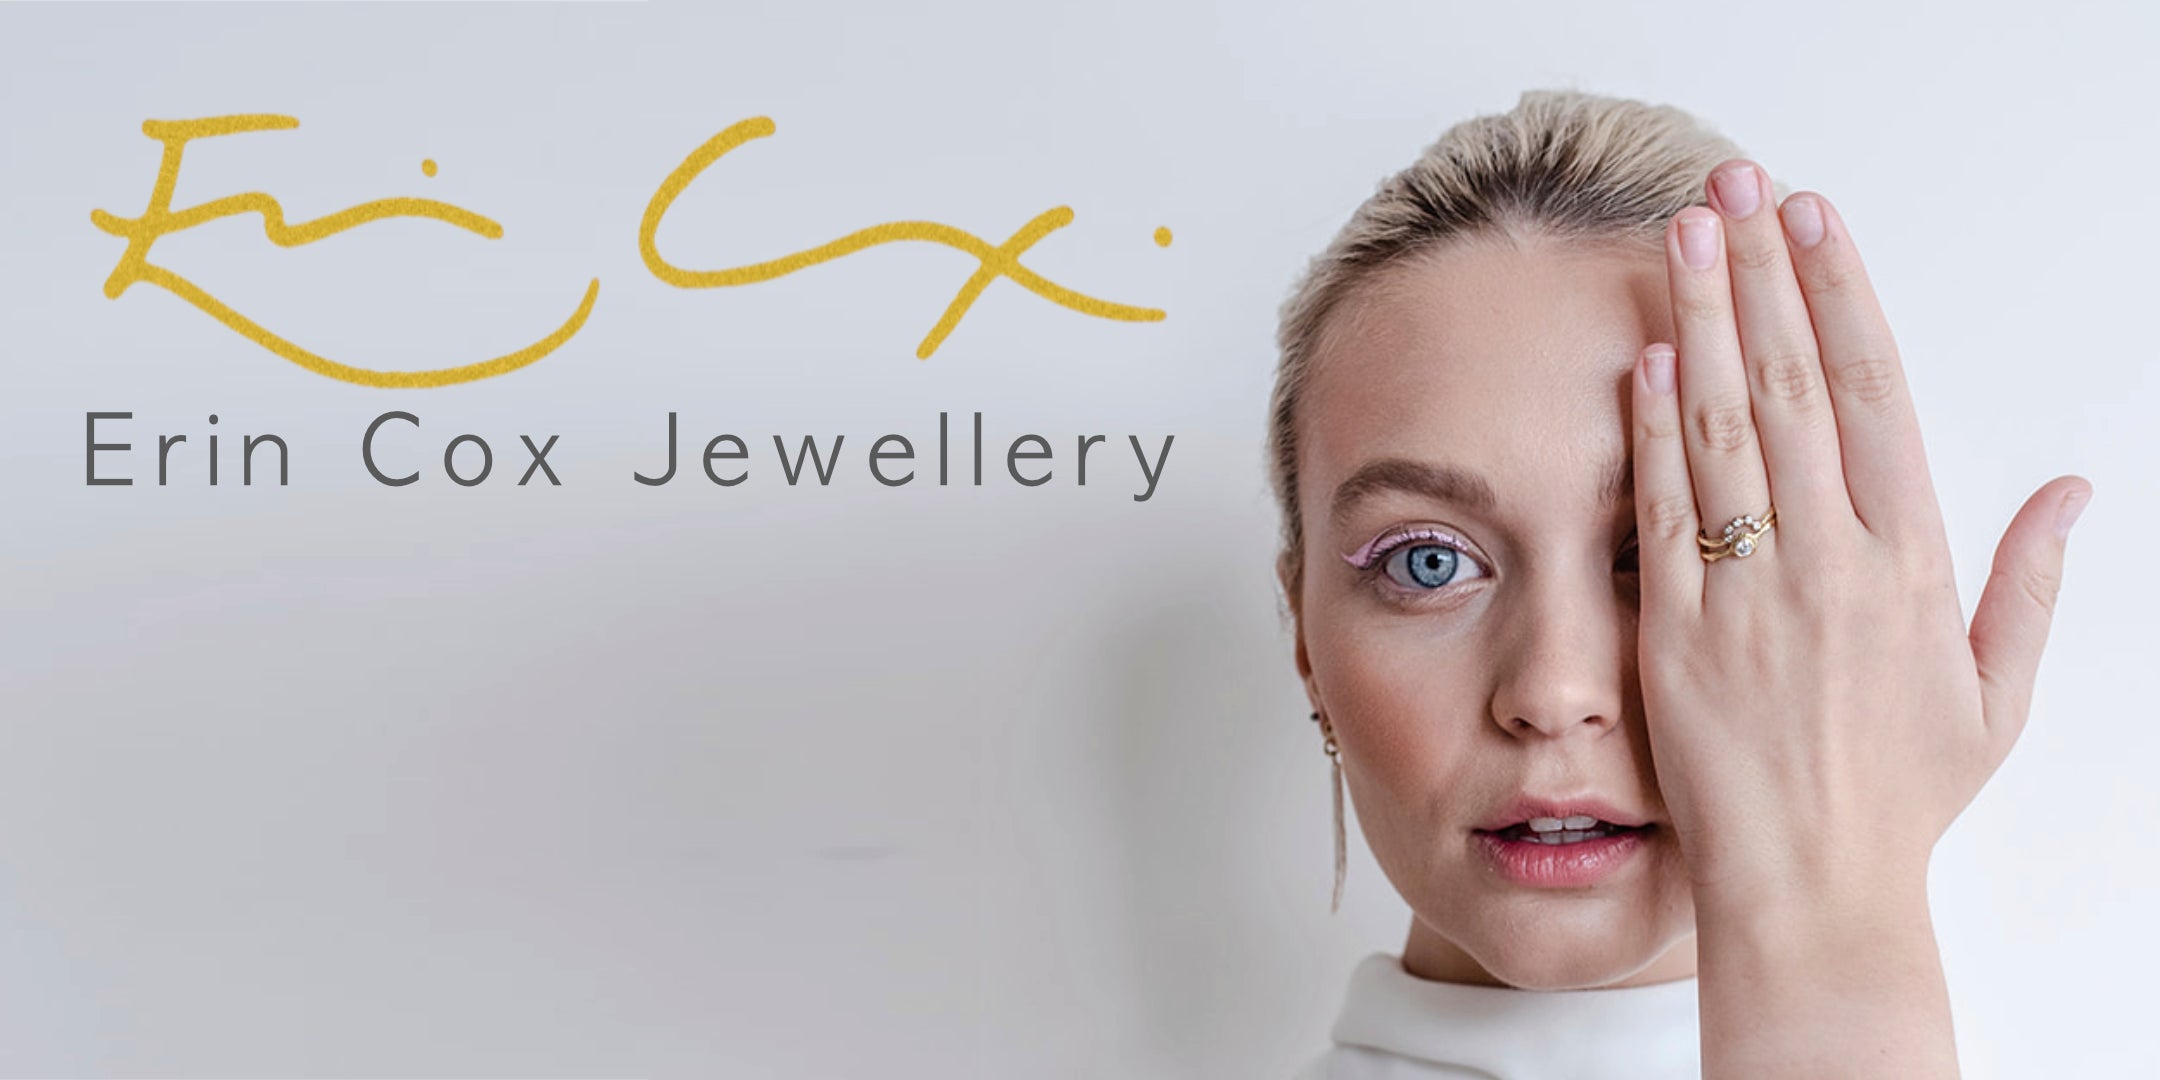 Erin Cox jewellery bespoke engagement ring campaign photo